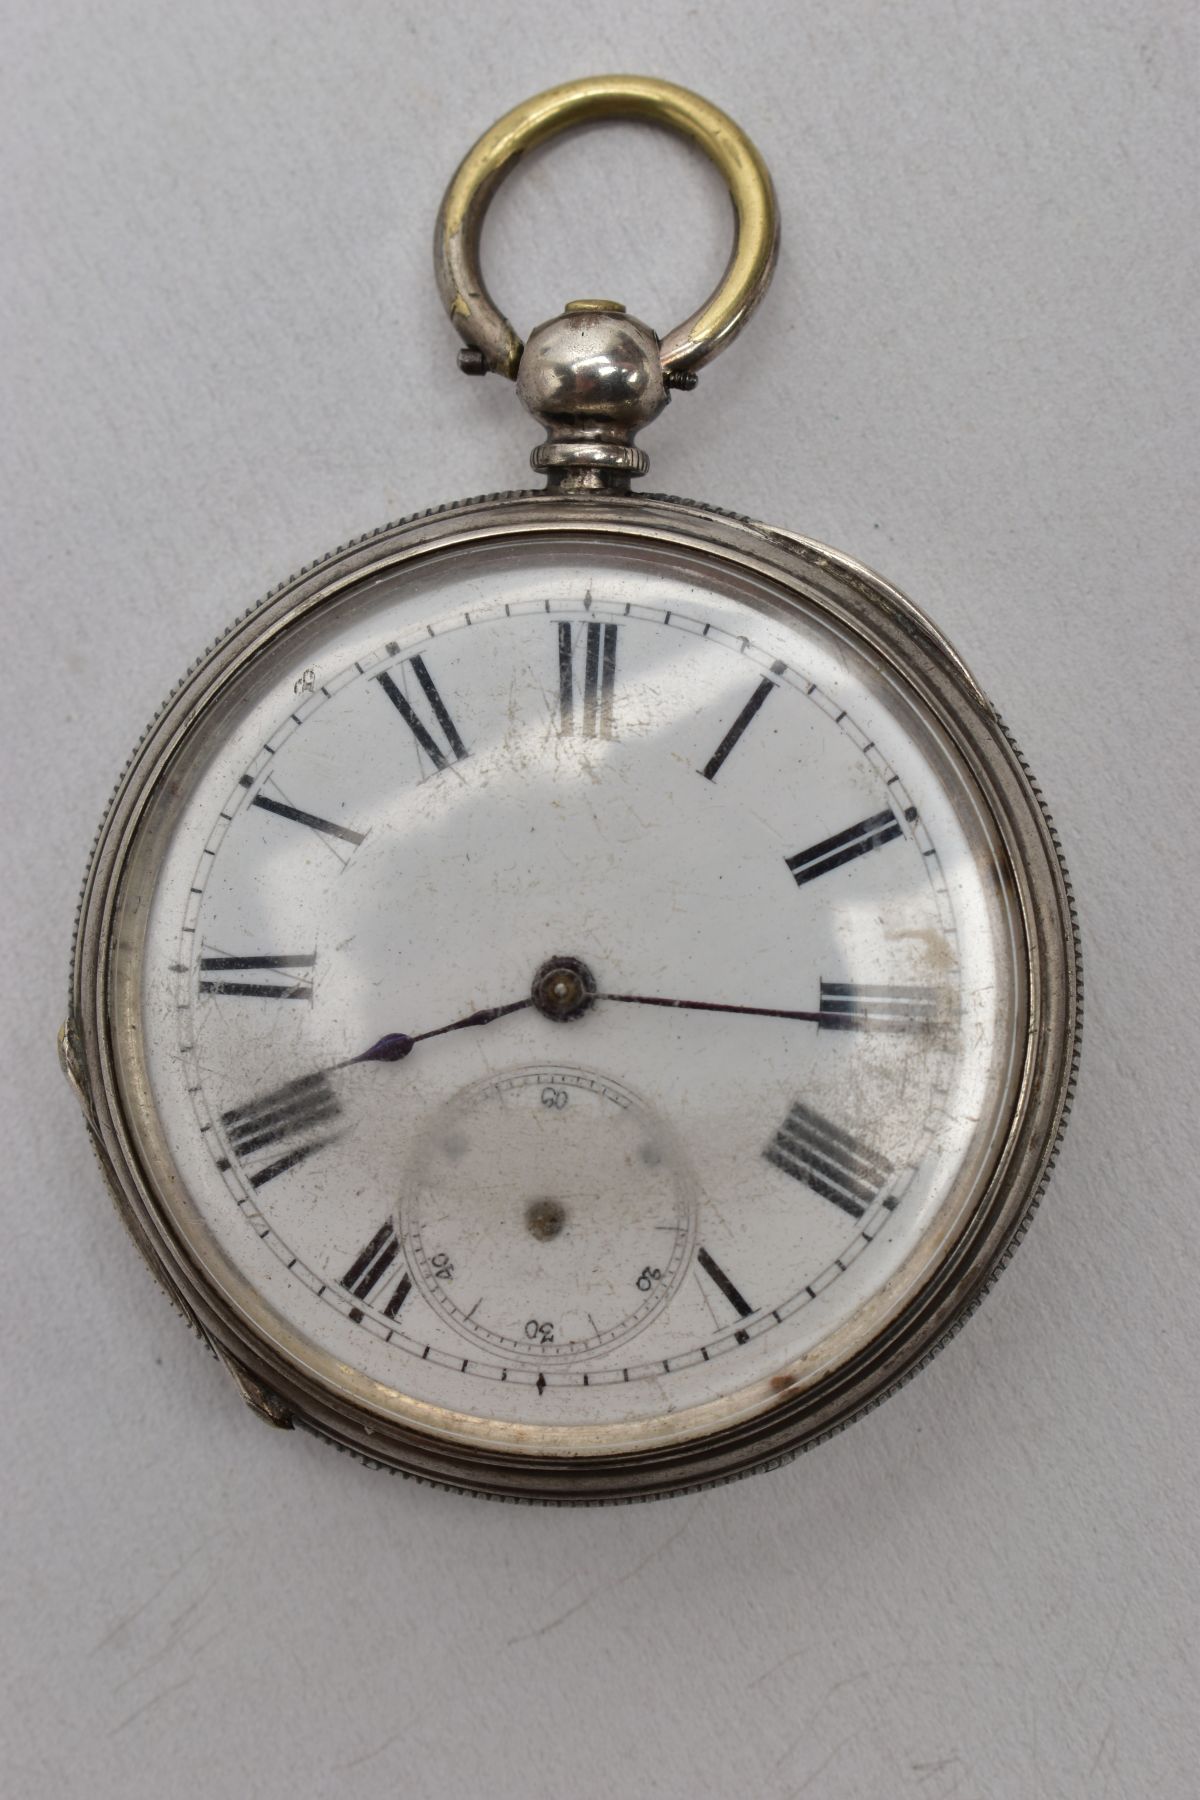 TWO EARLY 20TH CENTURY SILVER OPEN FACE POCKET WATCHES, both with white faces and black Roman - Image 2 of 9